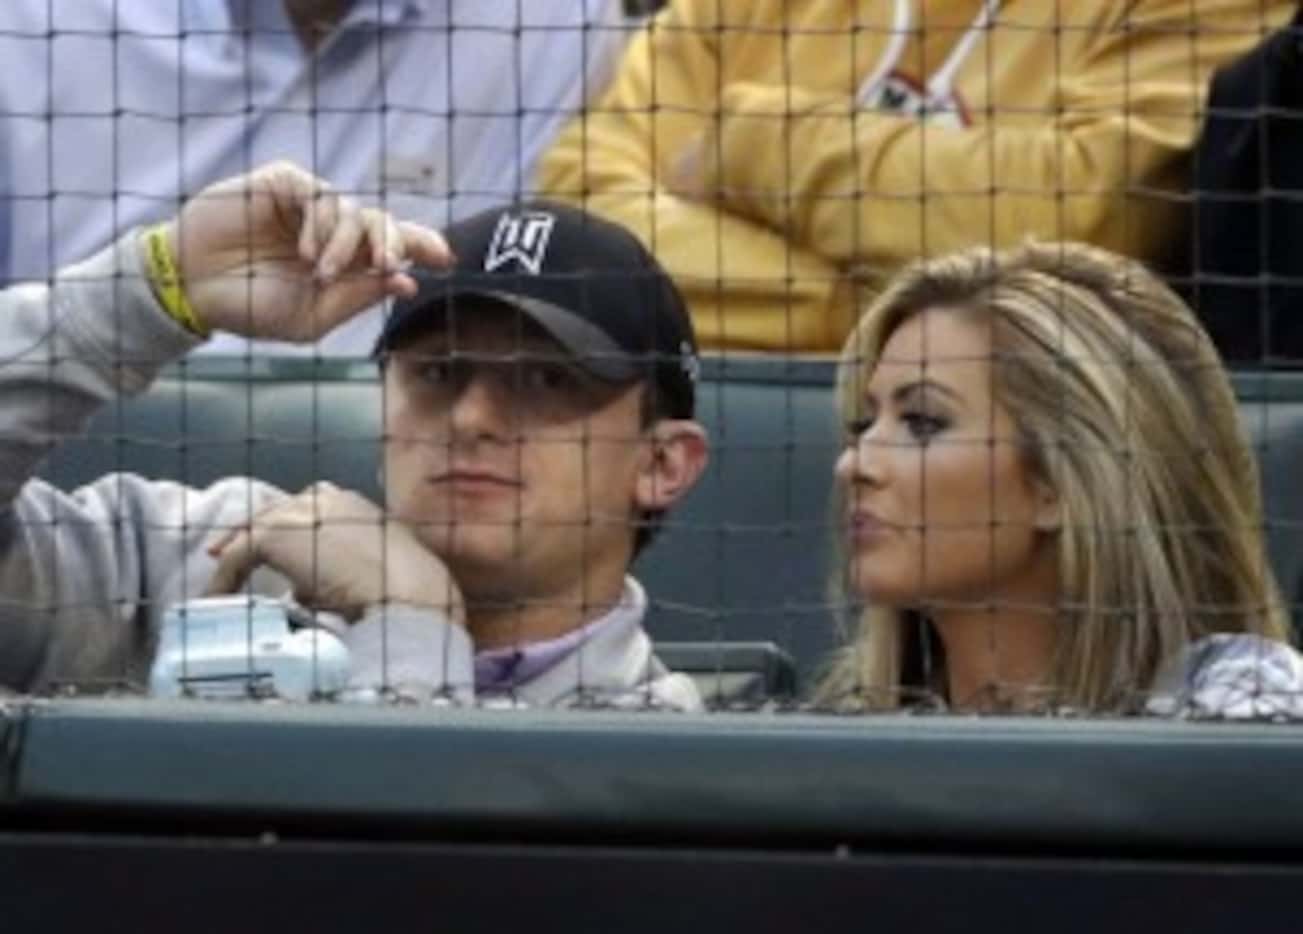  Johnny Manziel and Colleen Crowley attended a Texas Rangers game in 2015.